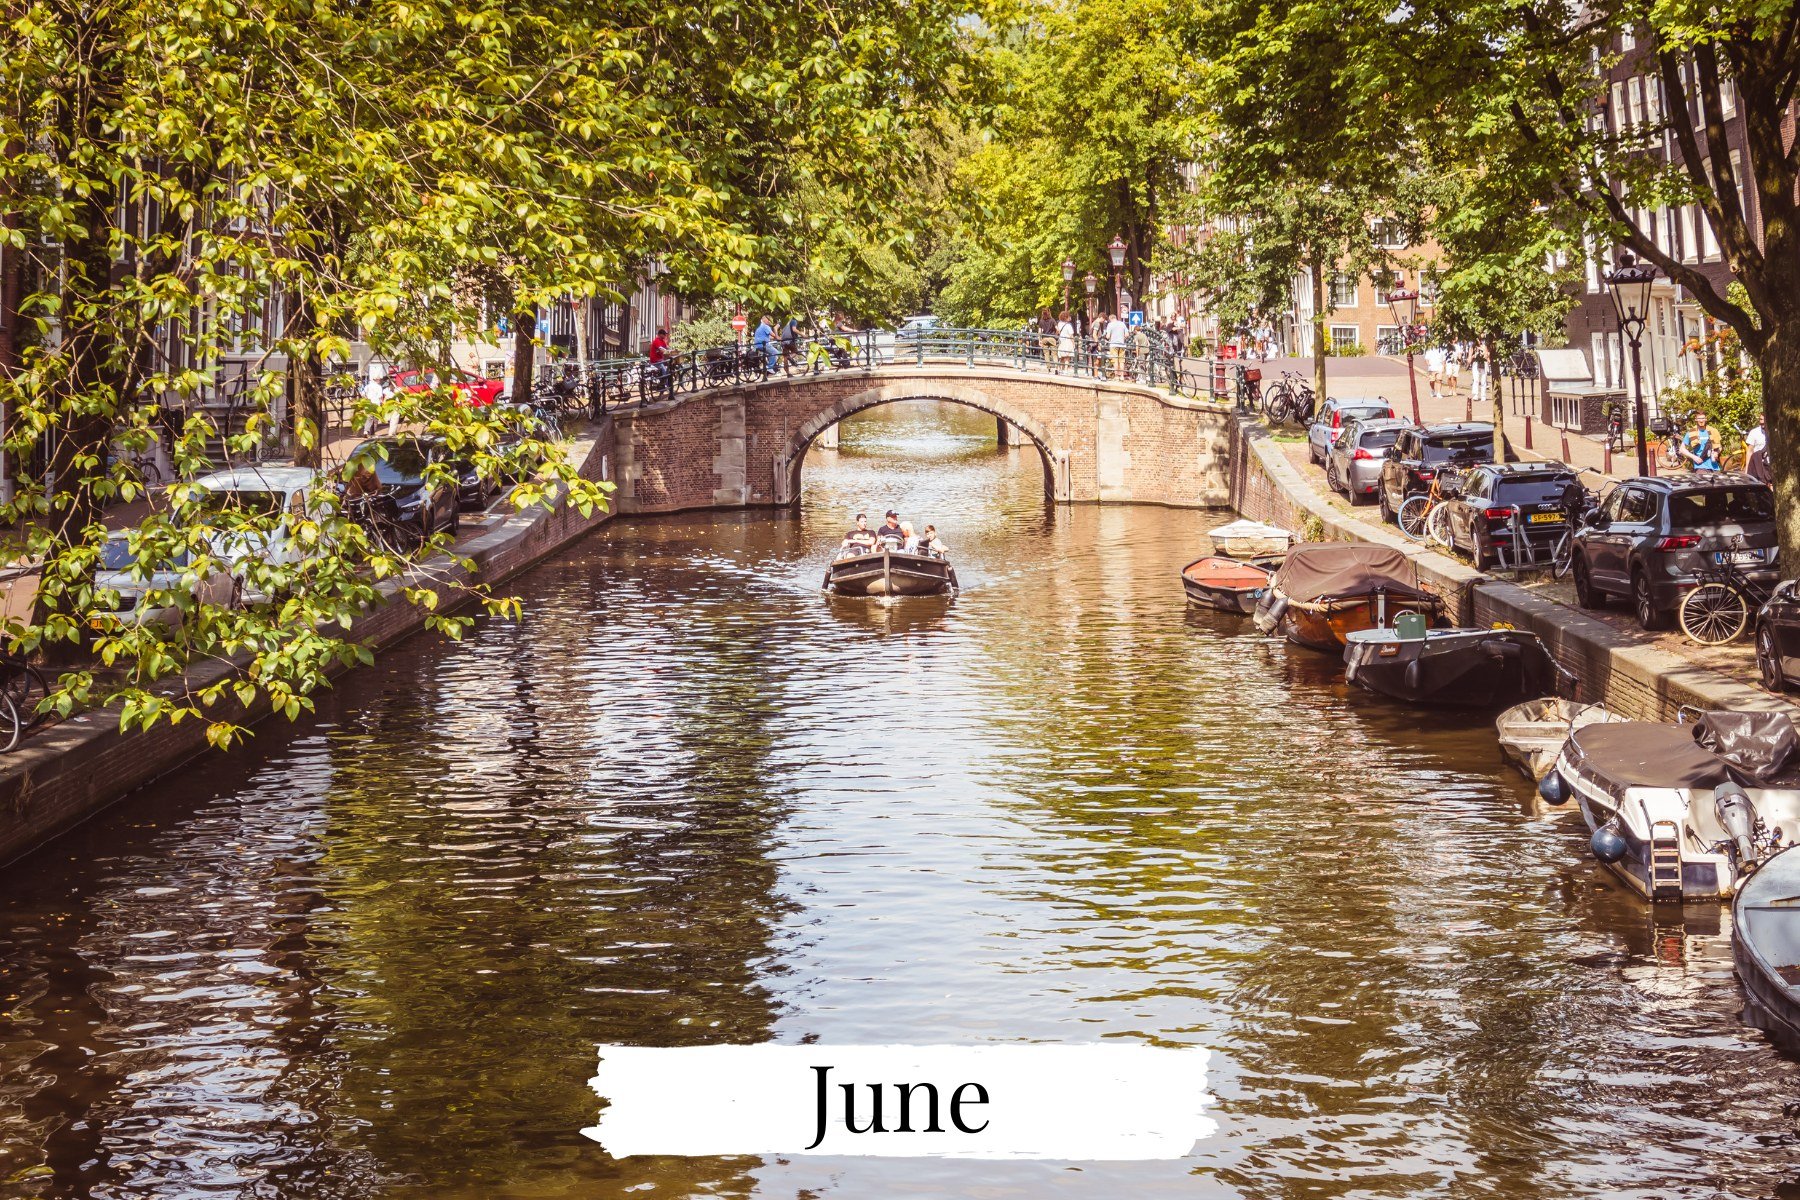 𝐇𝐞𝐥𝐥𝐨, 𝐉𝐮𝐧𝐞! 🌞 Let's dive into a new month filled with opportunities for creativity and photography. What exciting plans do you have for the upcoming 30 days? Share your creative journey with me! 📸

#amsterdam #amsterdamcanal #amsterdamcan